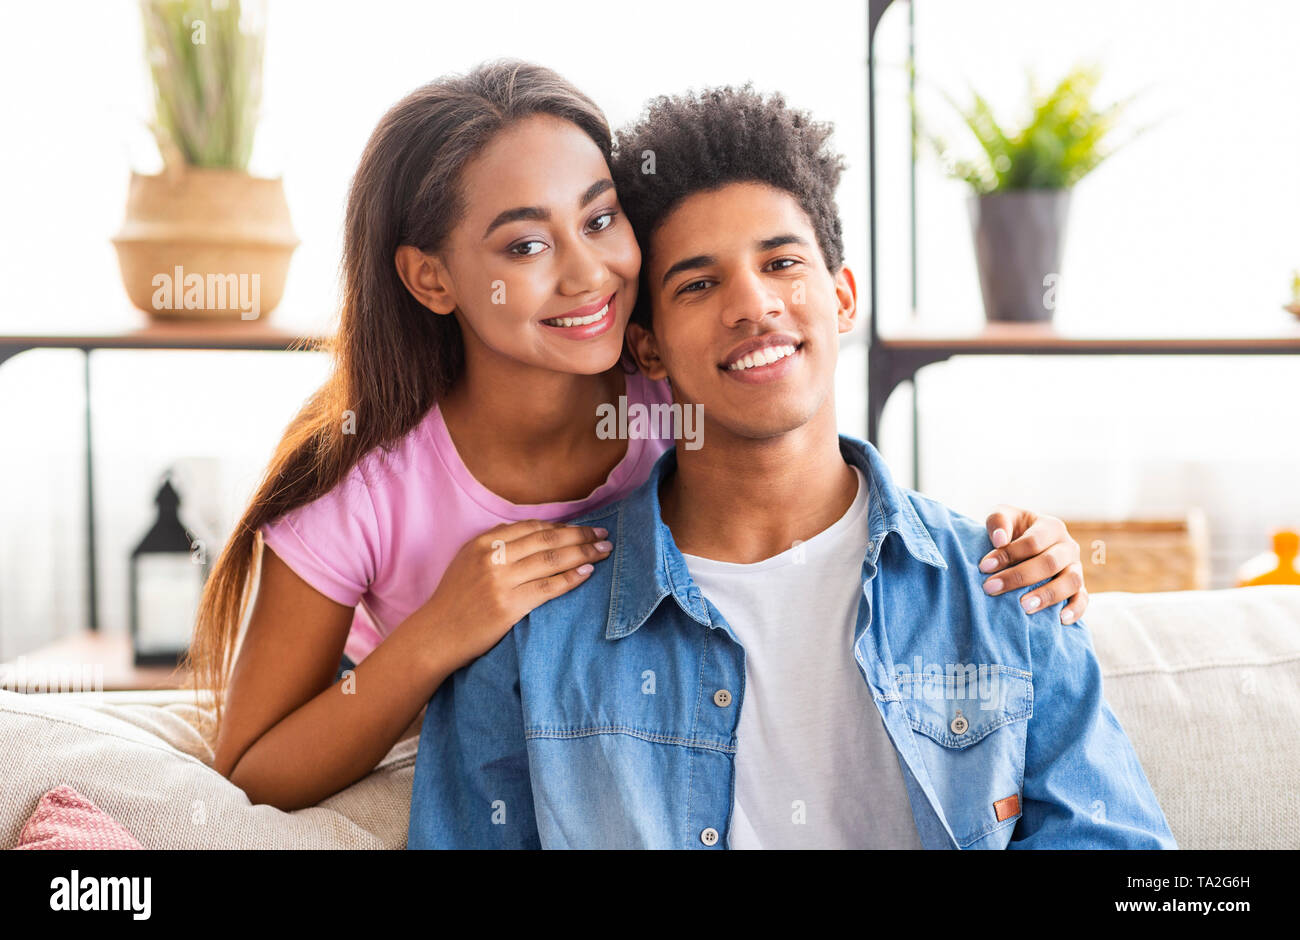 Romantic African American Teenage Couple Smiling At Camera Stock Photo